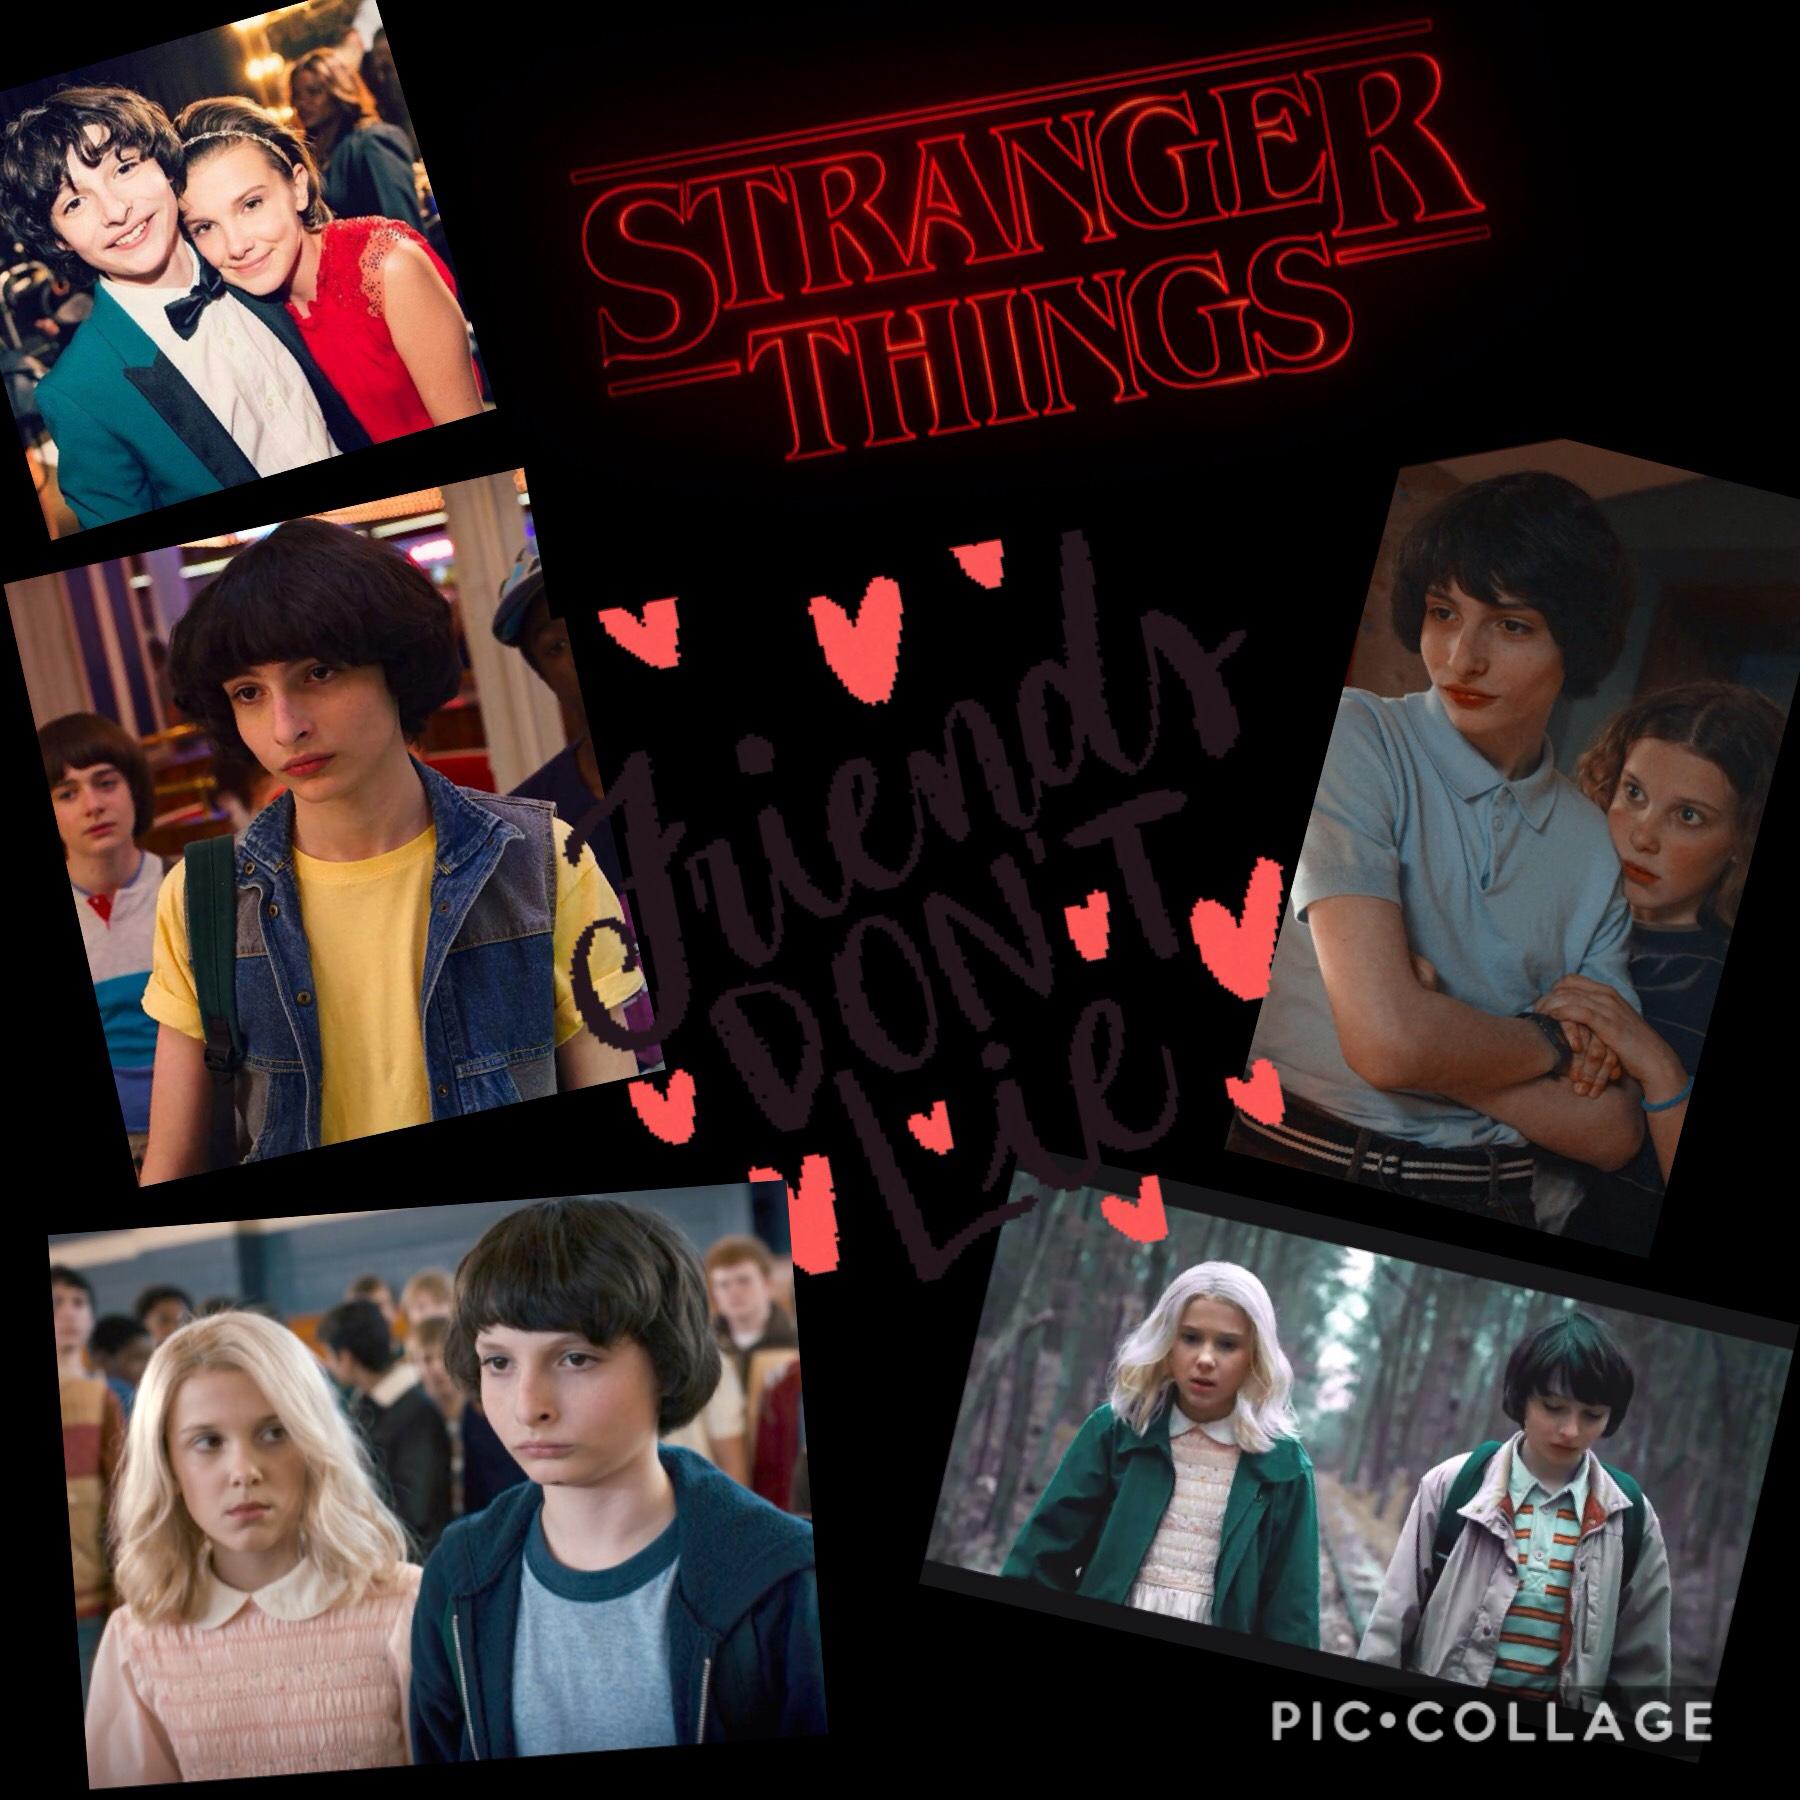          ❤️Tap❤️

I love stranger things! Buts here's a collage about mike and 11